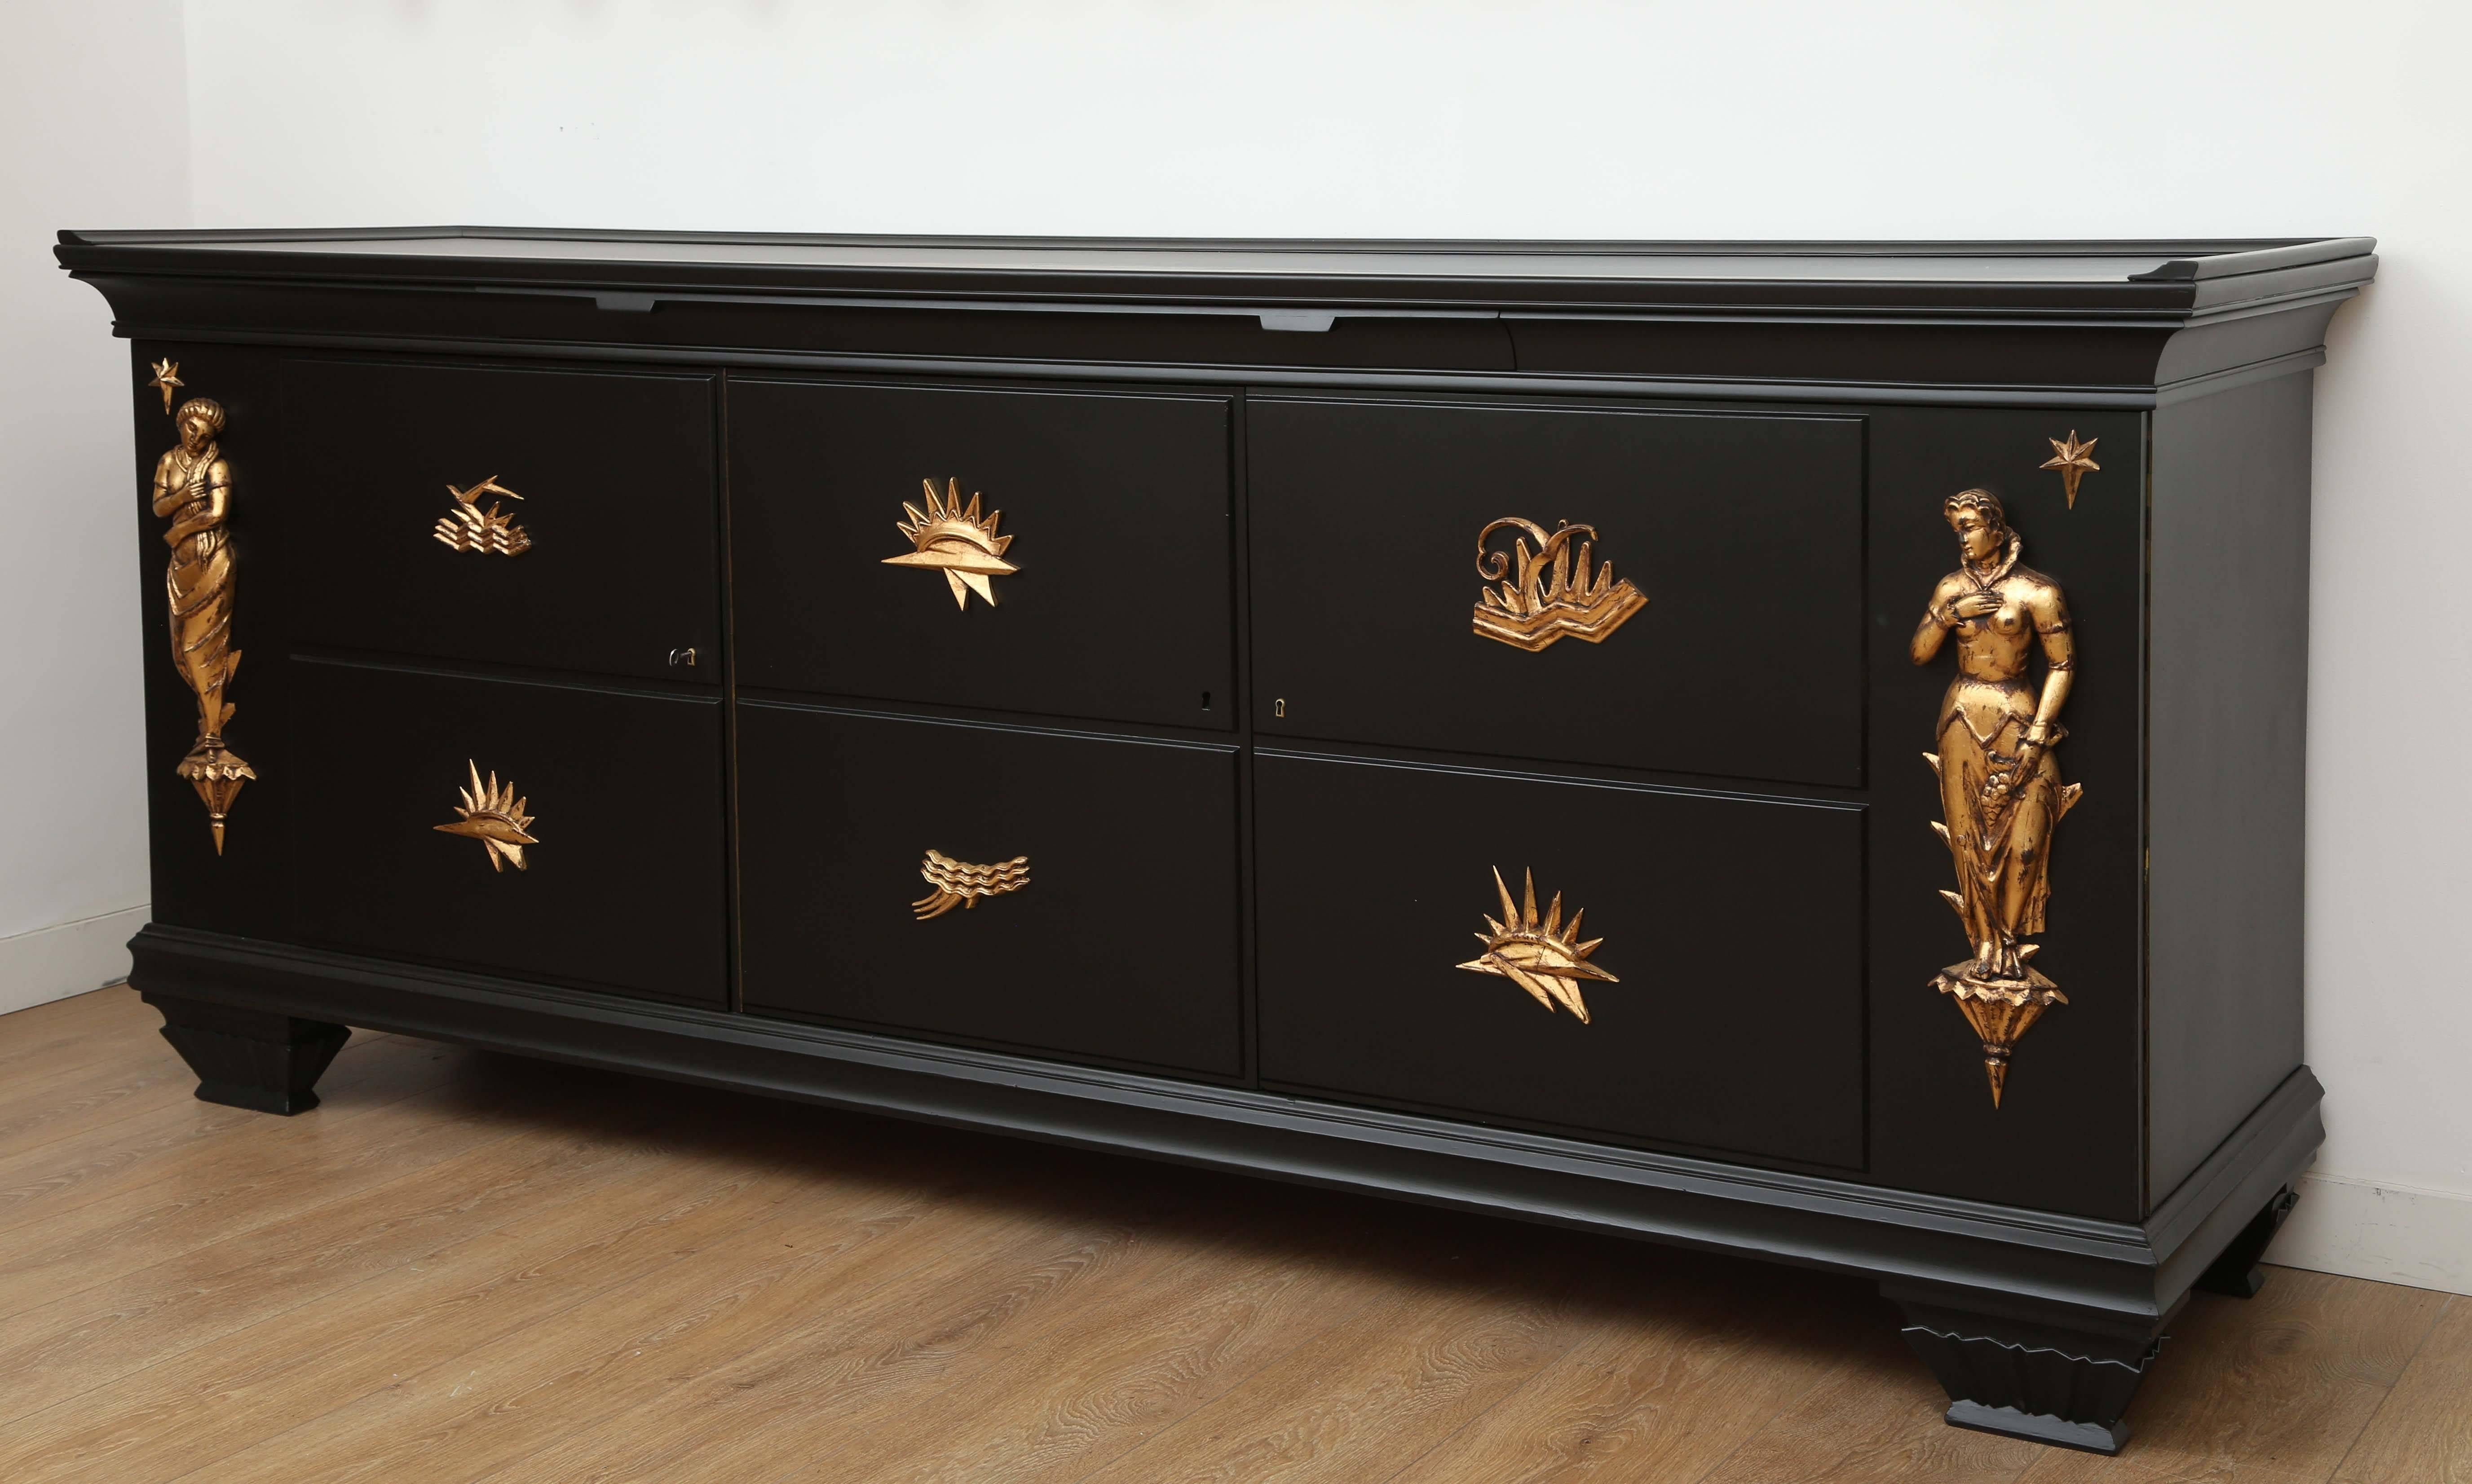 A large black lacquered three-door sideboard with giltwood cariatides at either end, each door is divided into two panels with an applied carved giltwood abstract element. Cabinet has a pullout service surface just beneath the top at the centre.